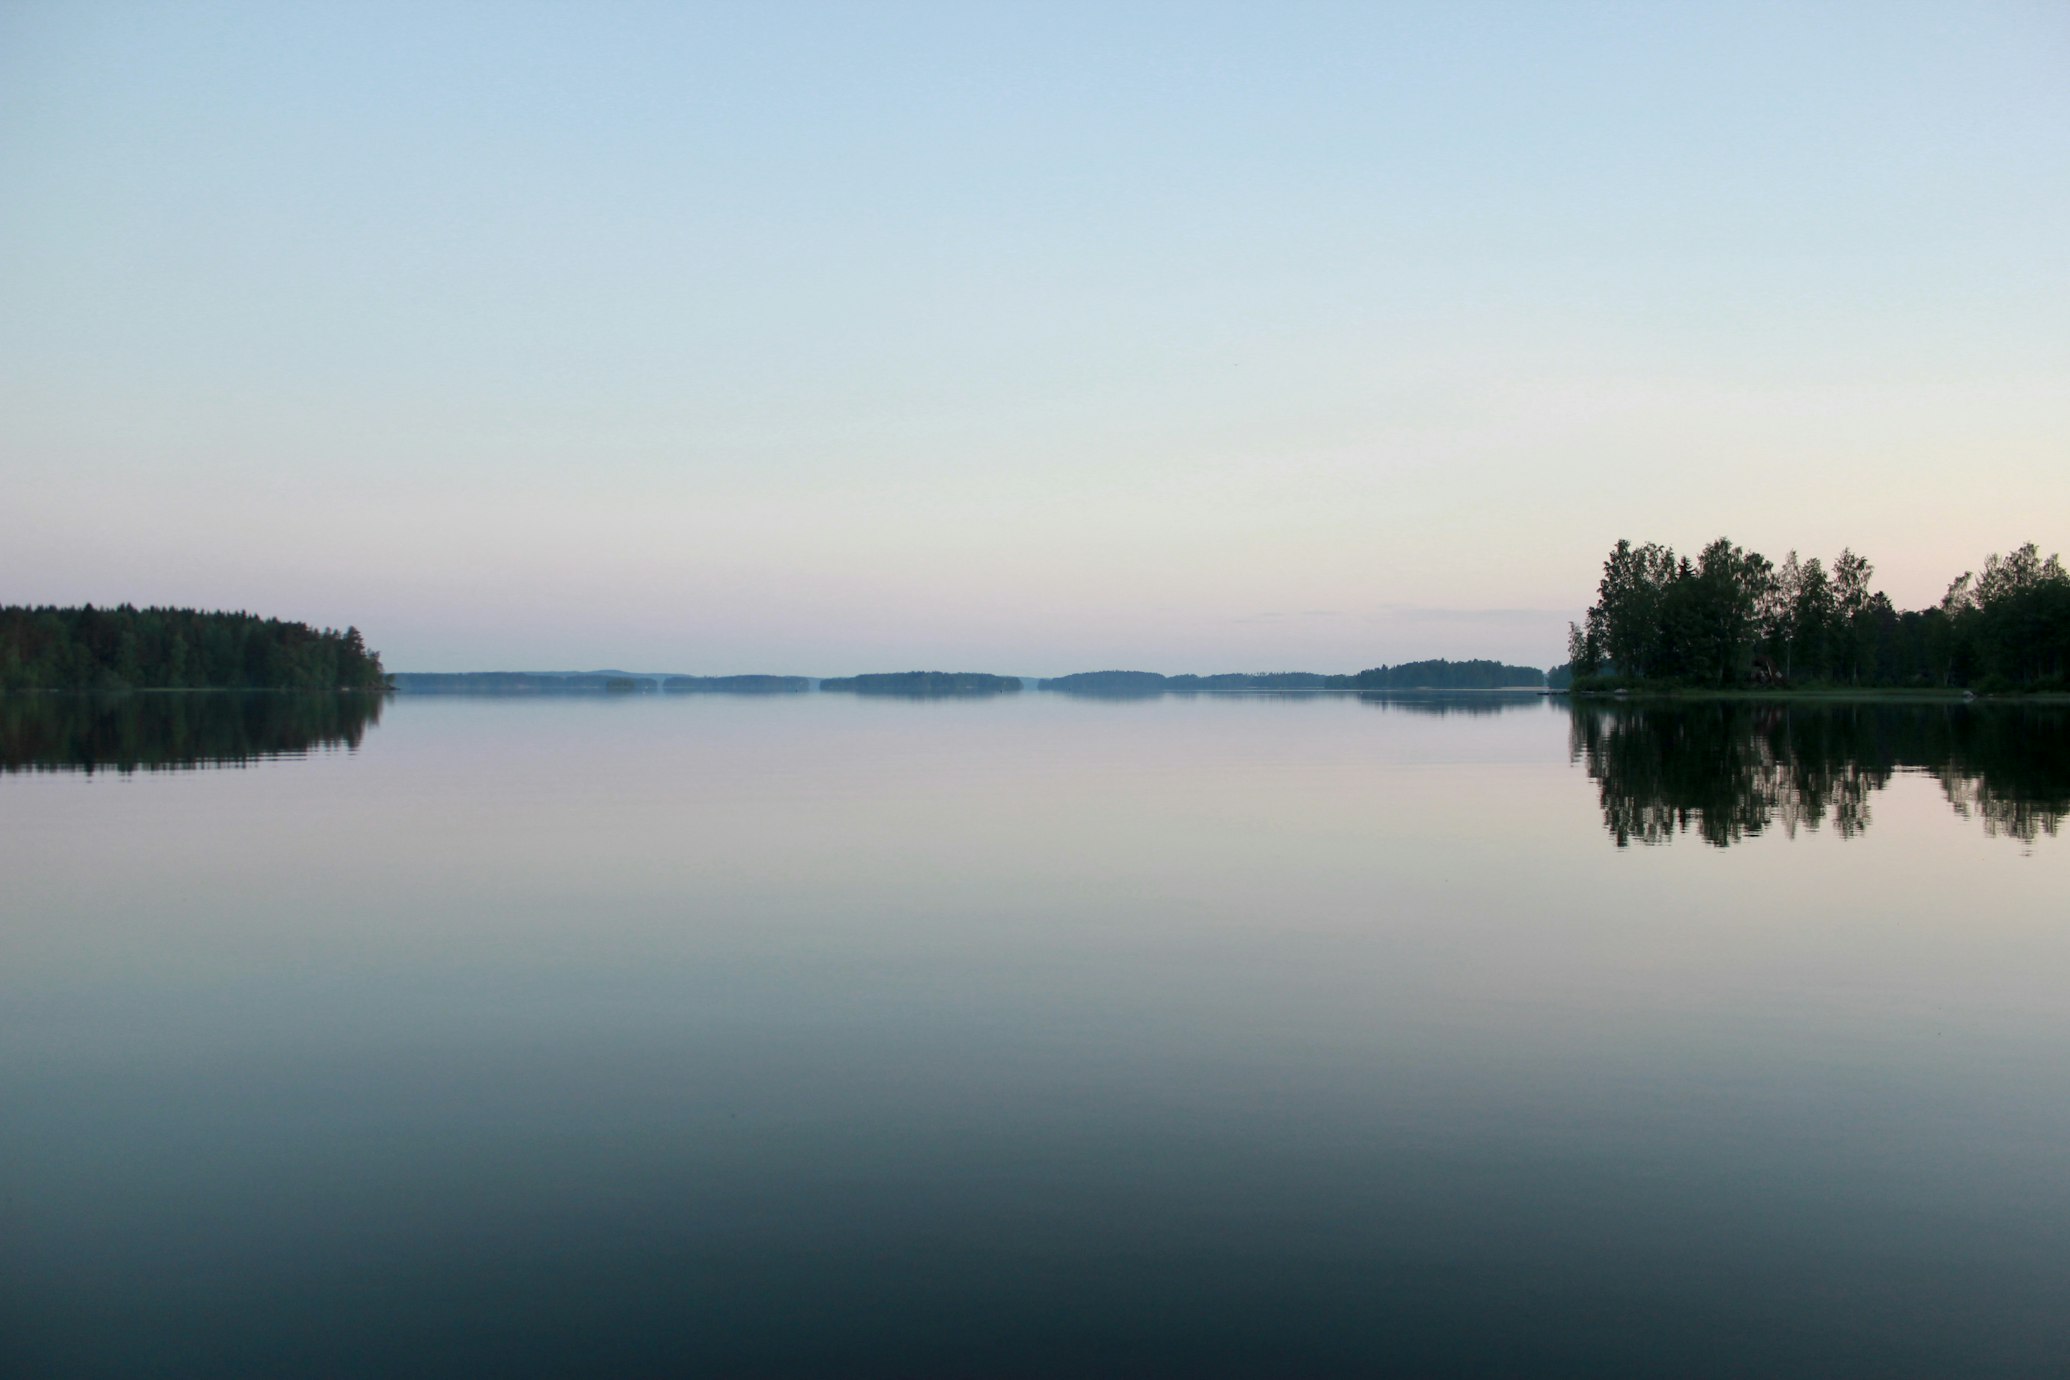 View of Lake under clear sky in Finland